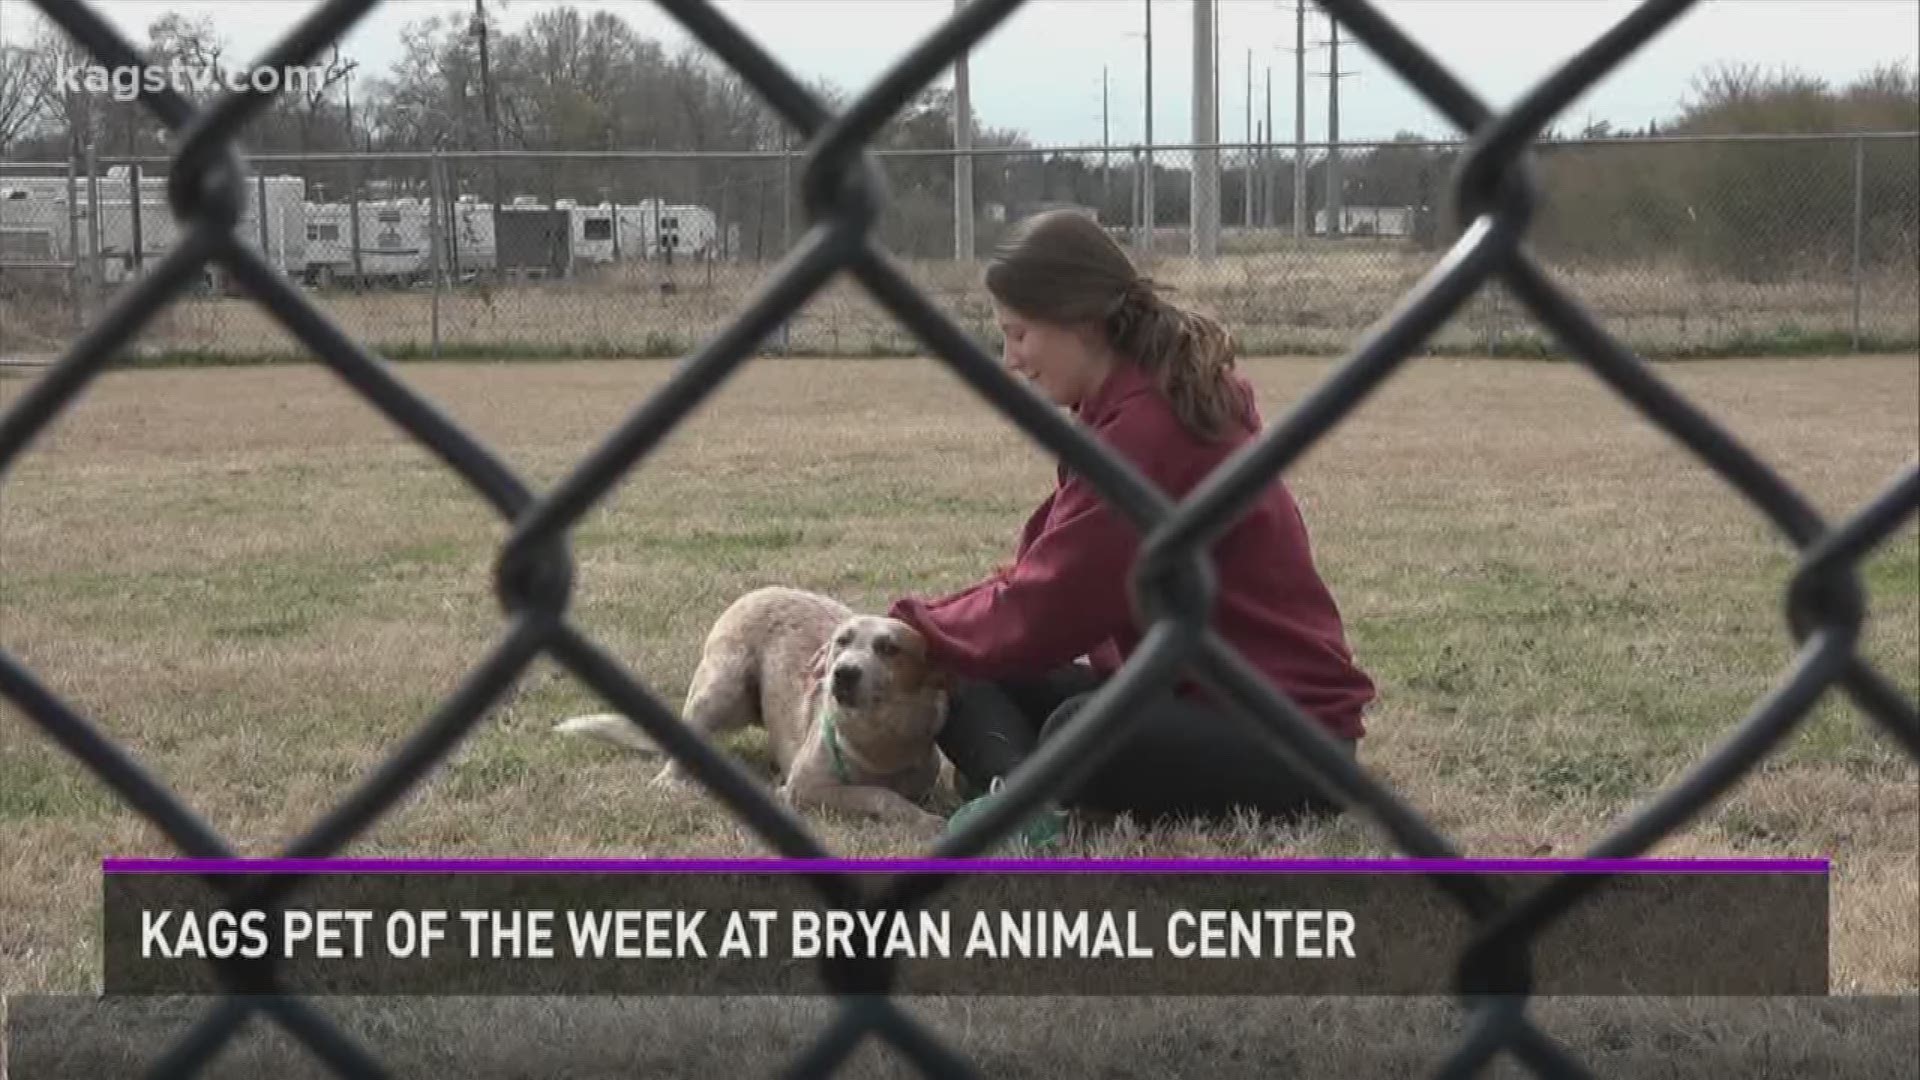 Welcome to our new KAGS pet of the week segment. I'll be visiting shelters and rescue groups in the area to showcase some of the animals that need forever homes. This week we stopped by the Bryan Animal Center. Take a look.